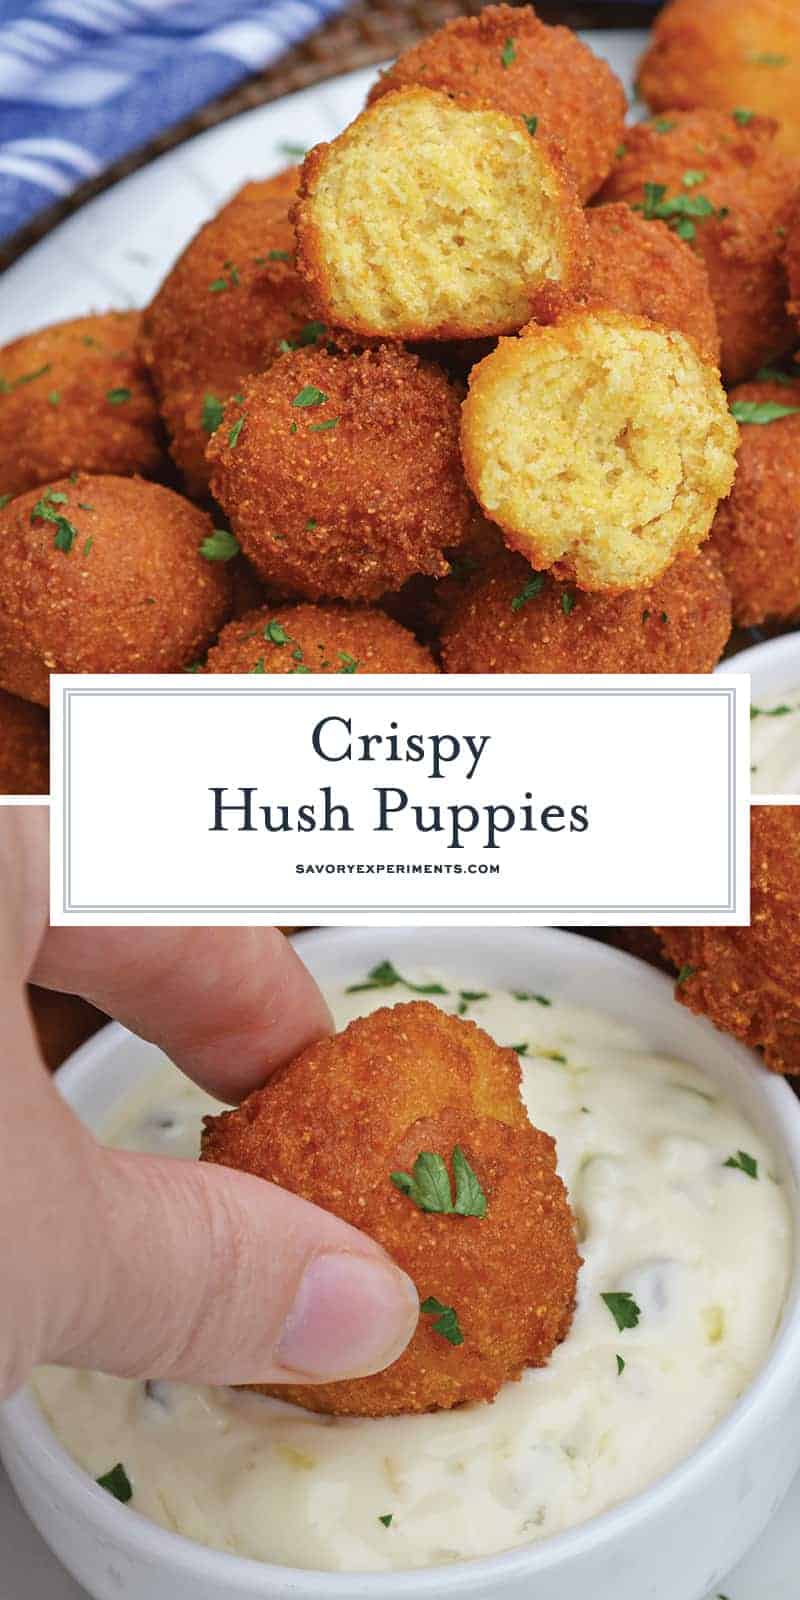 Hush Puppies are gently fried cornbread with a crunchy outside and soft, doughy inside. Serve with fish fry, fried shrimp or any BBQ! #hushpuppyrecipe www.savoryexperiments.com 